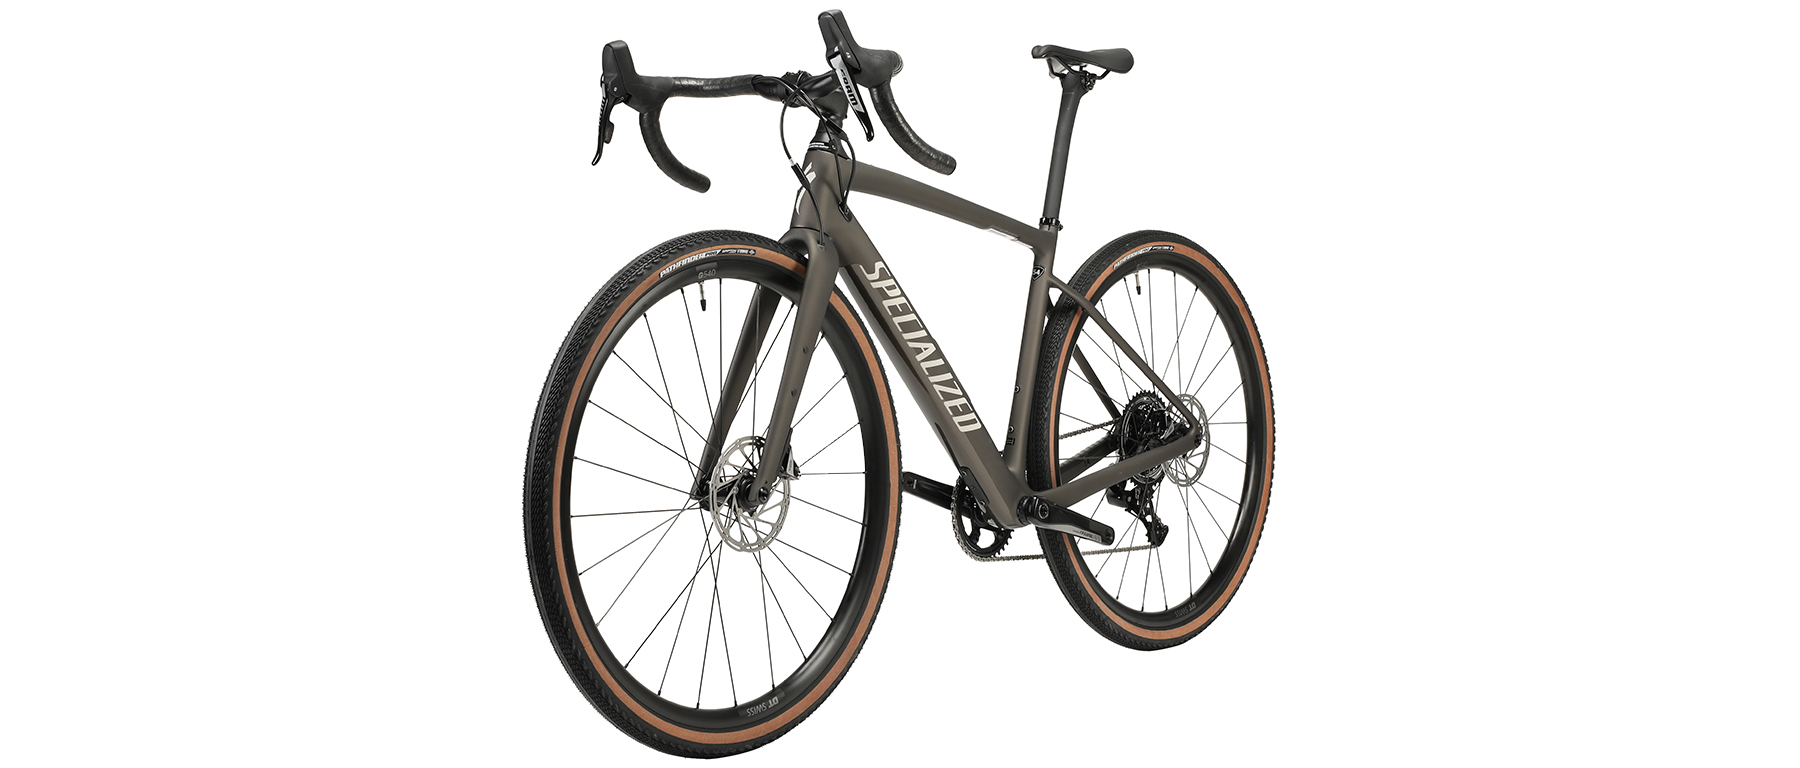 Specialized Diverge Comp Carbon SRAM Rival 1 Bicycle 2022